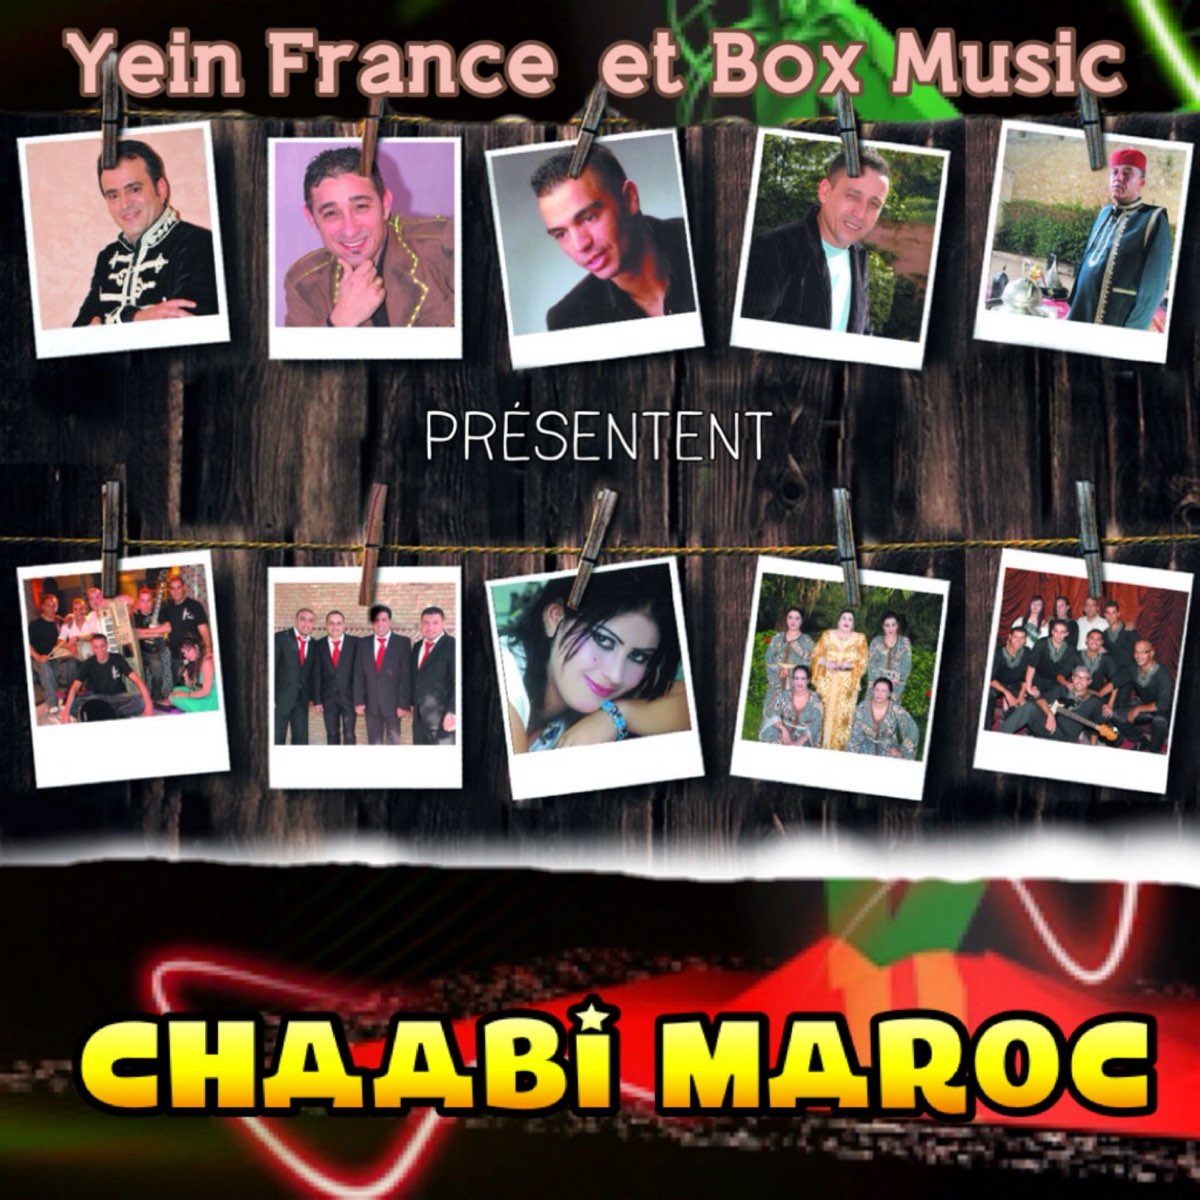 Chaabi Maroc by Various Artists on Apple Music